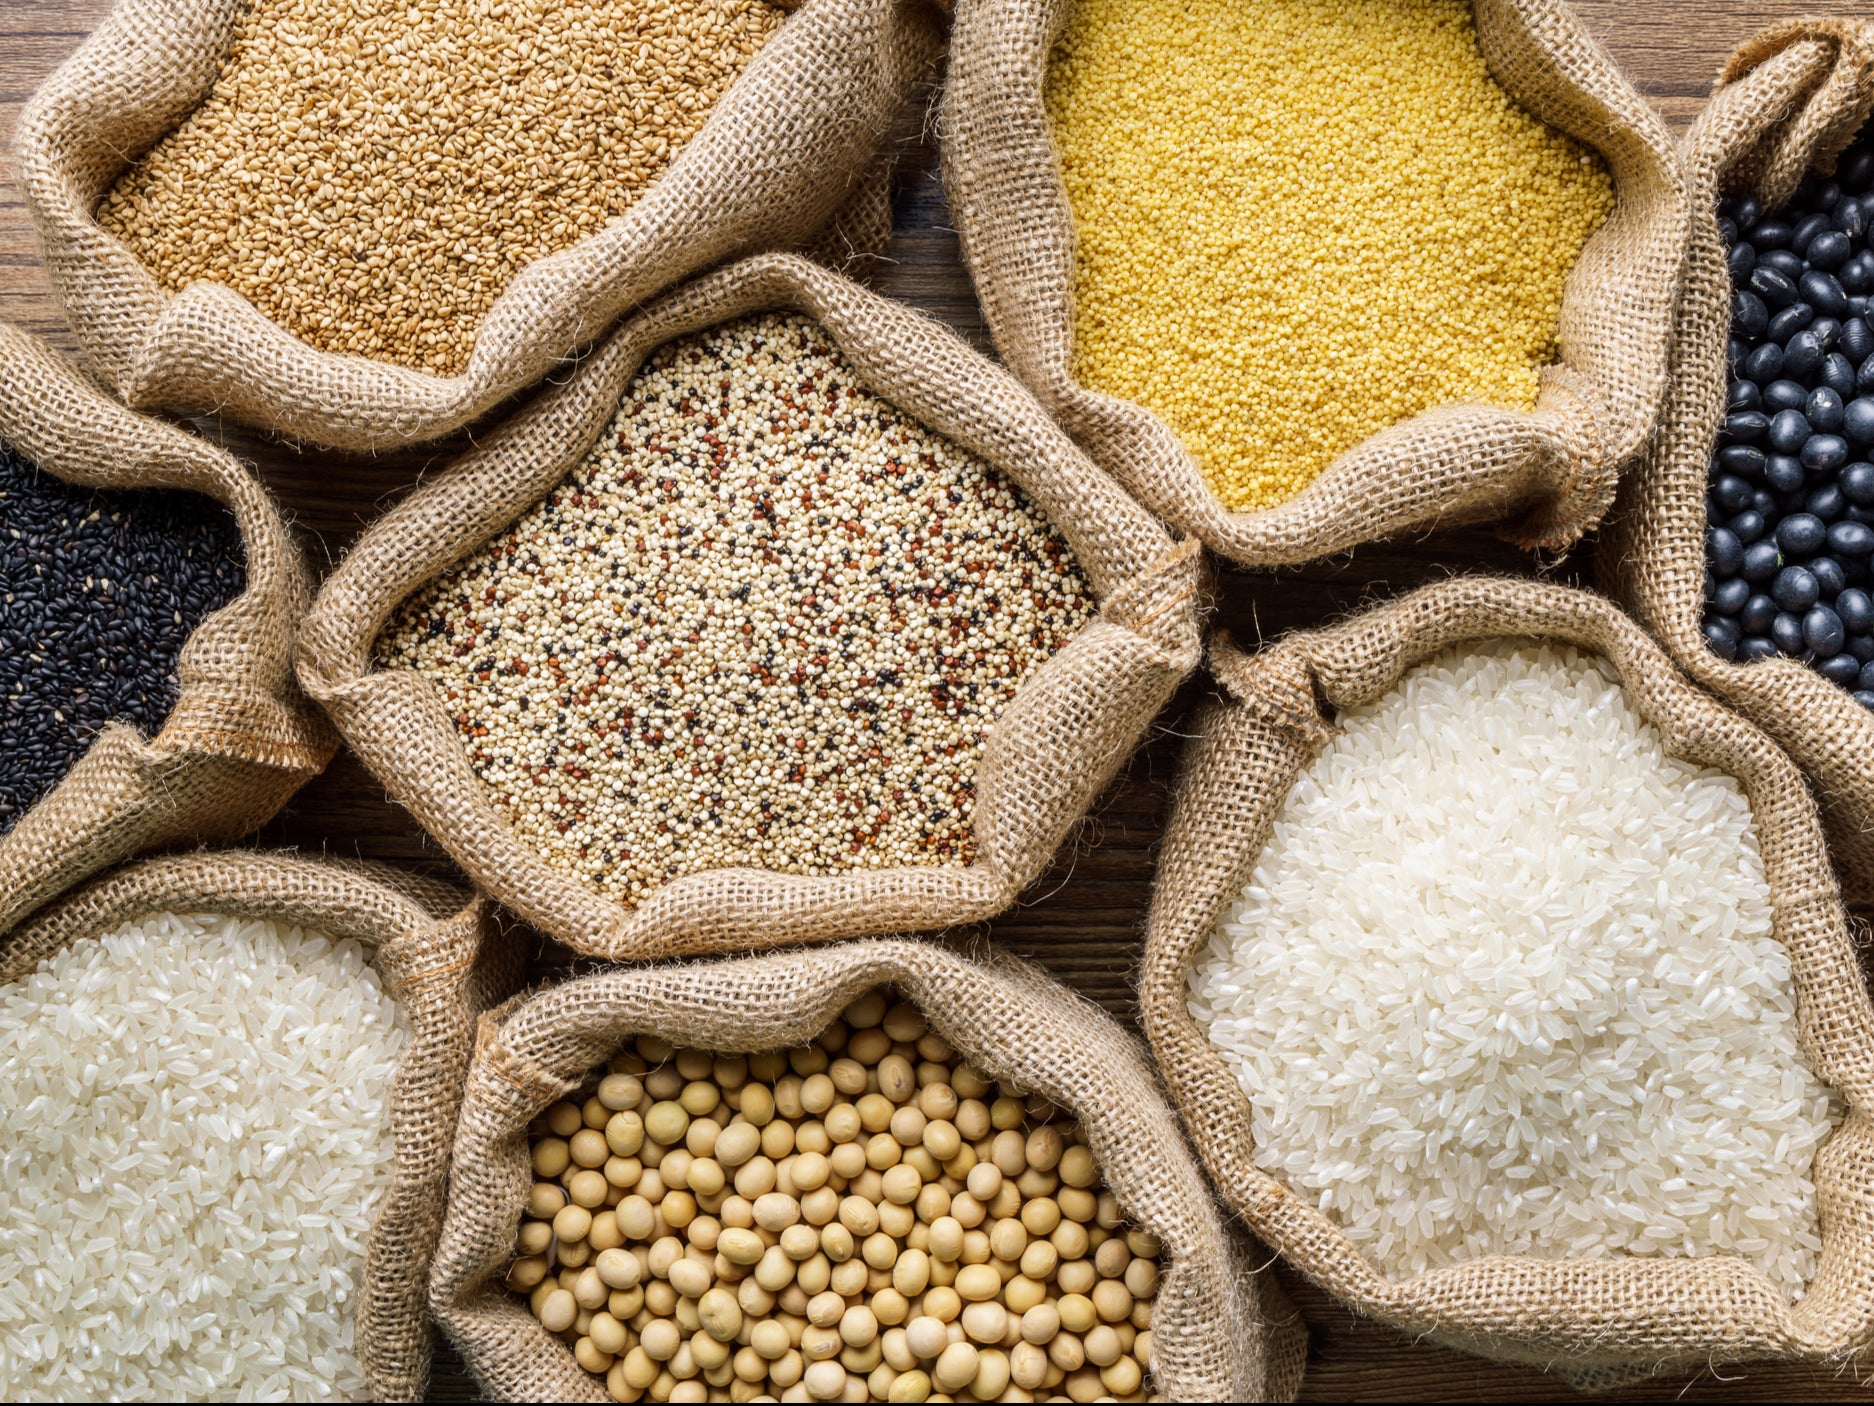 Varieties of grains, seeds and raw quinoa